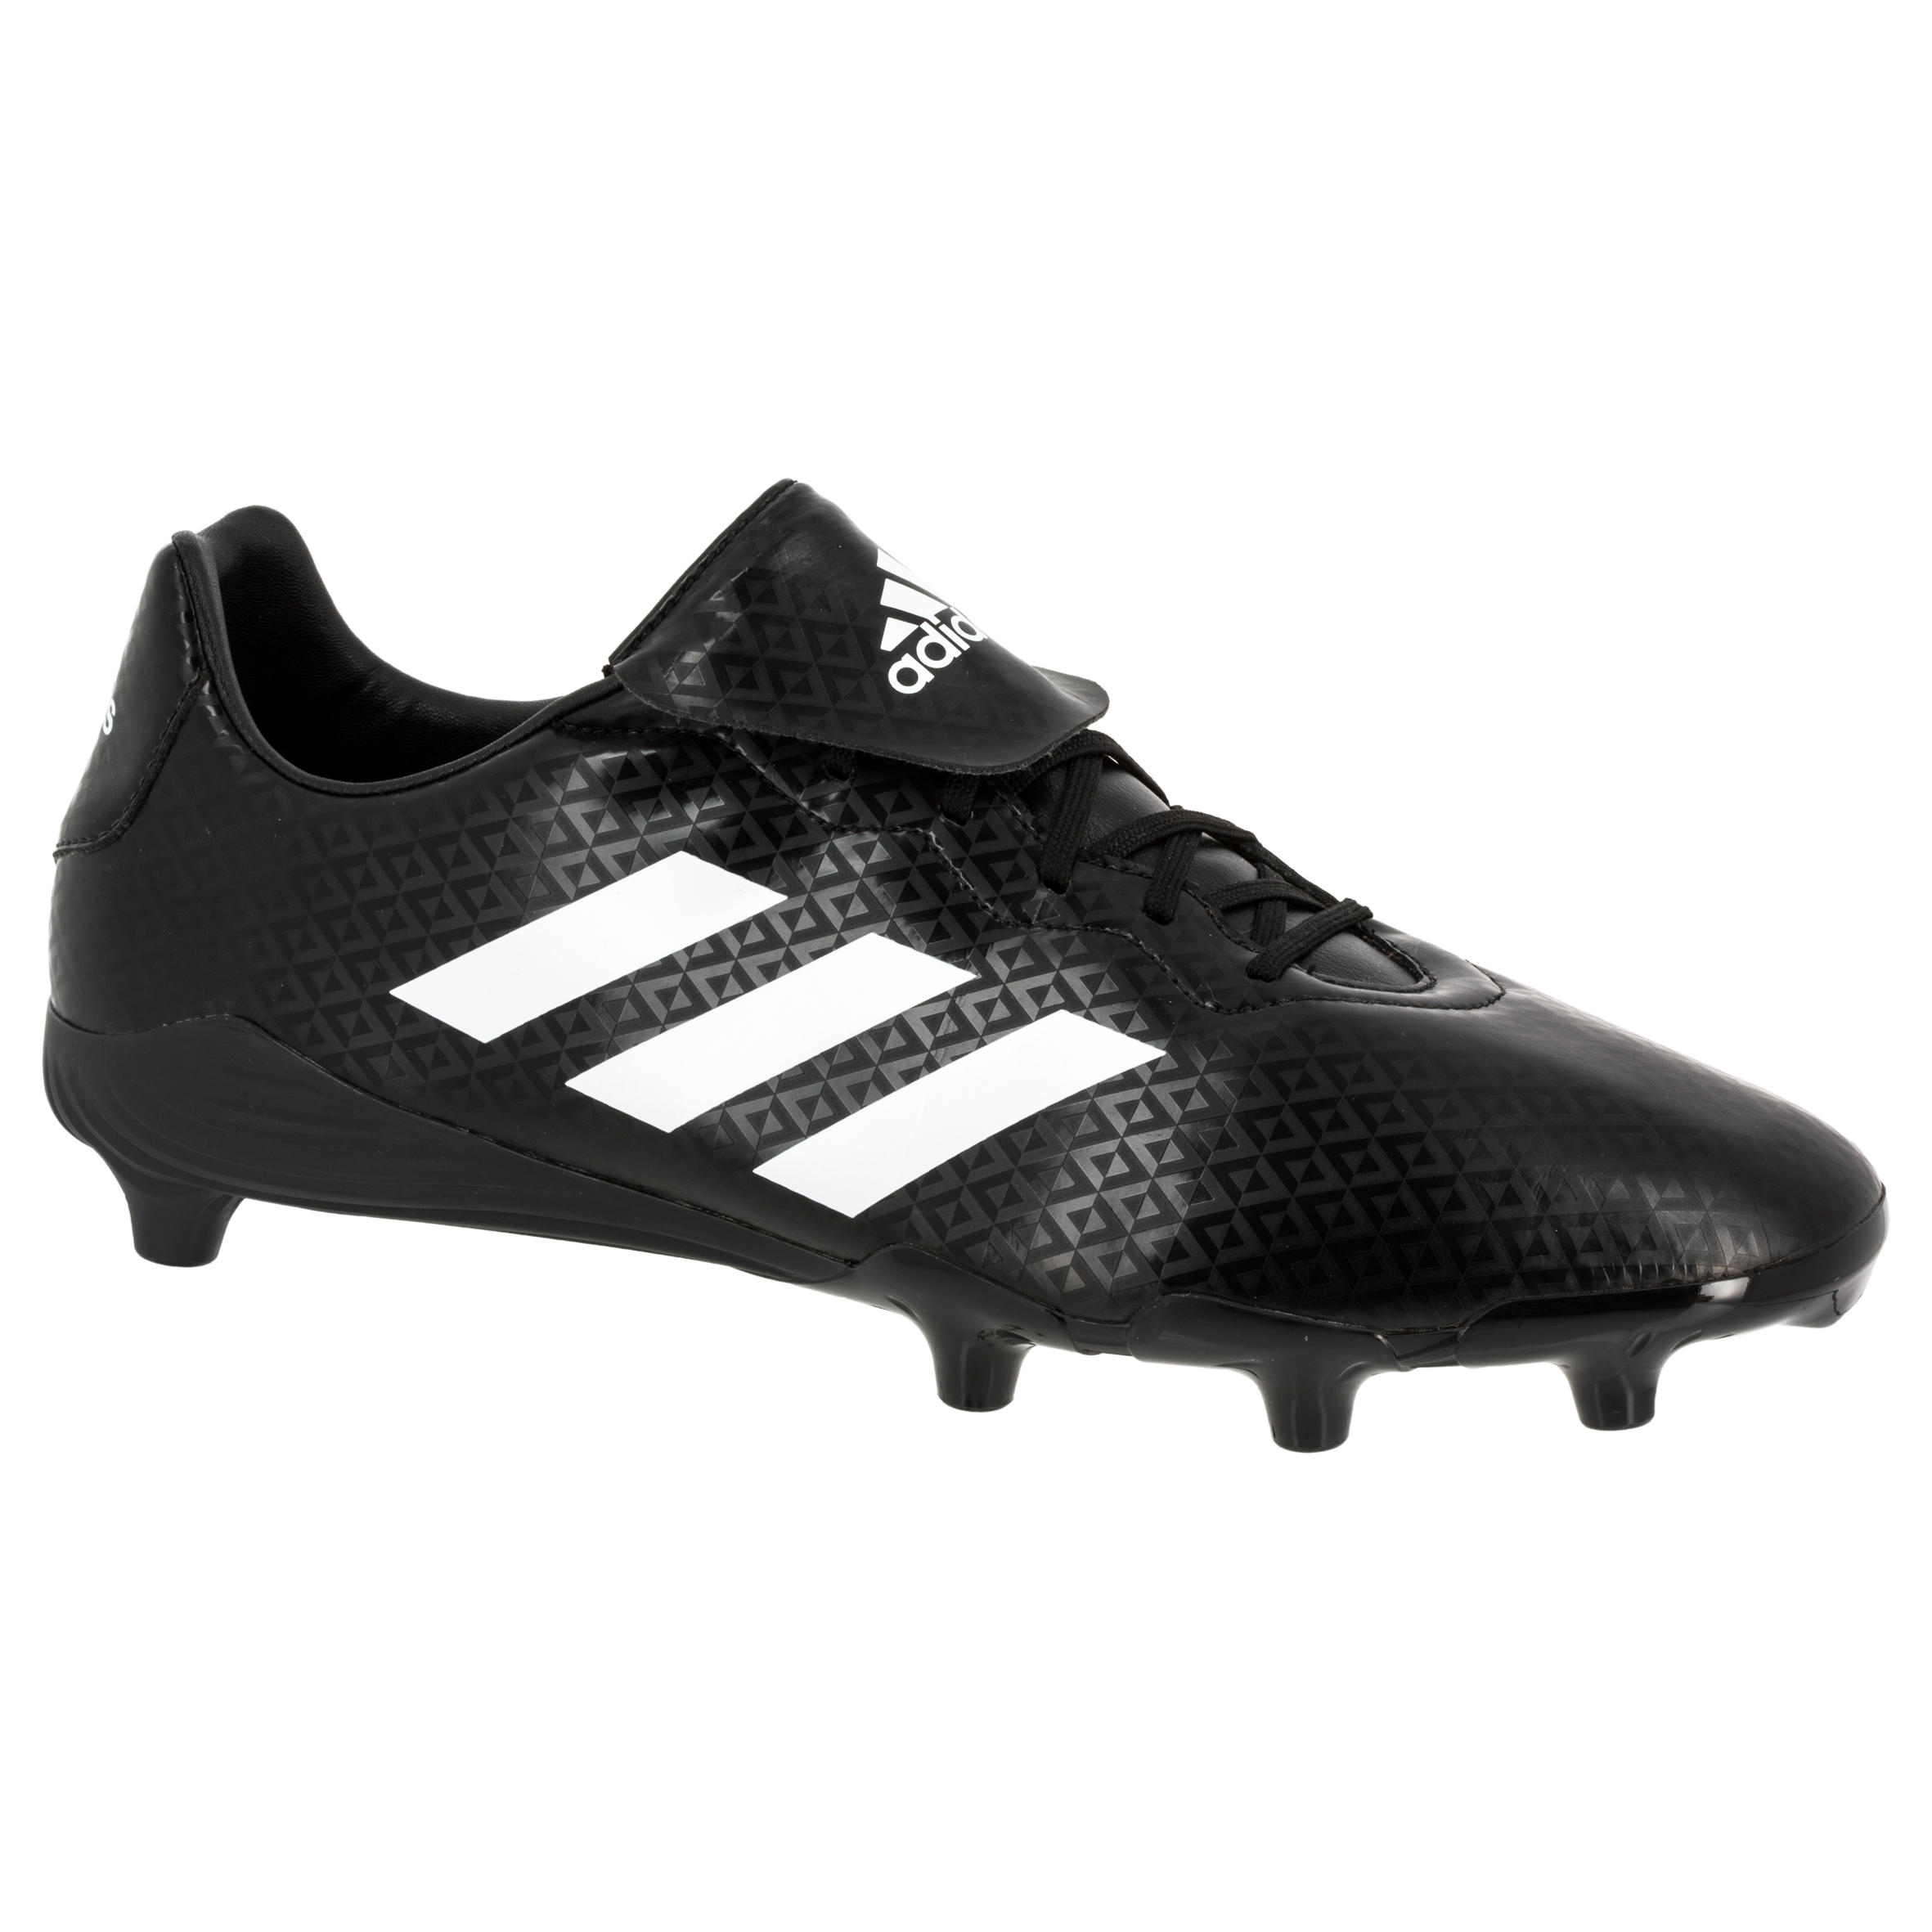 adidas rumble rugby boots